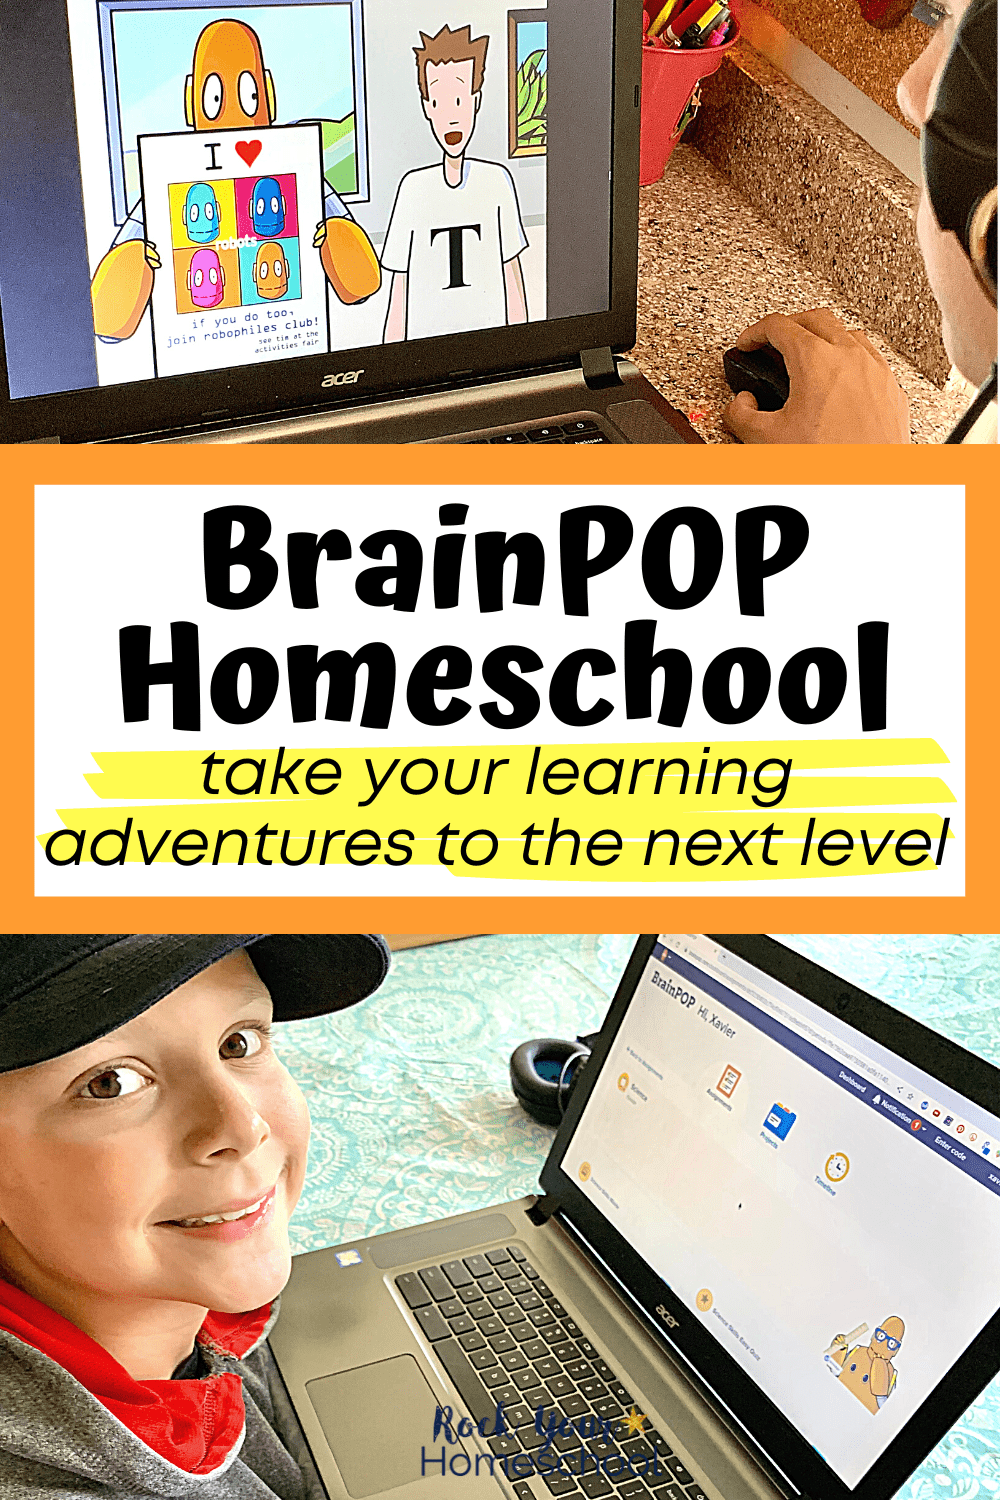 BrainPOP Homeschool: How to Take Your Learning Adventures to the Next Level